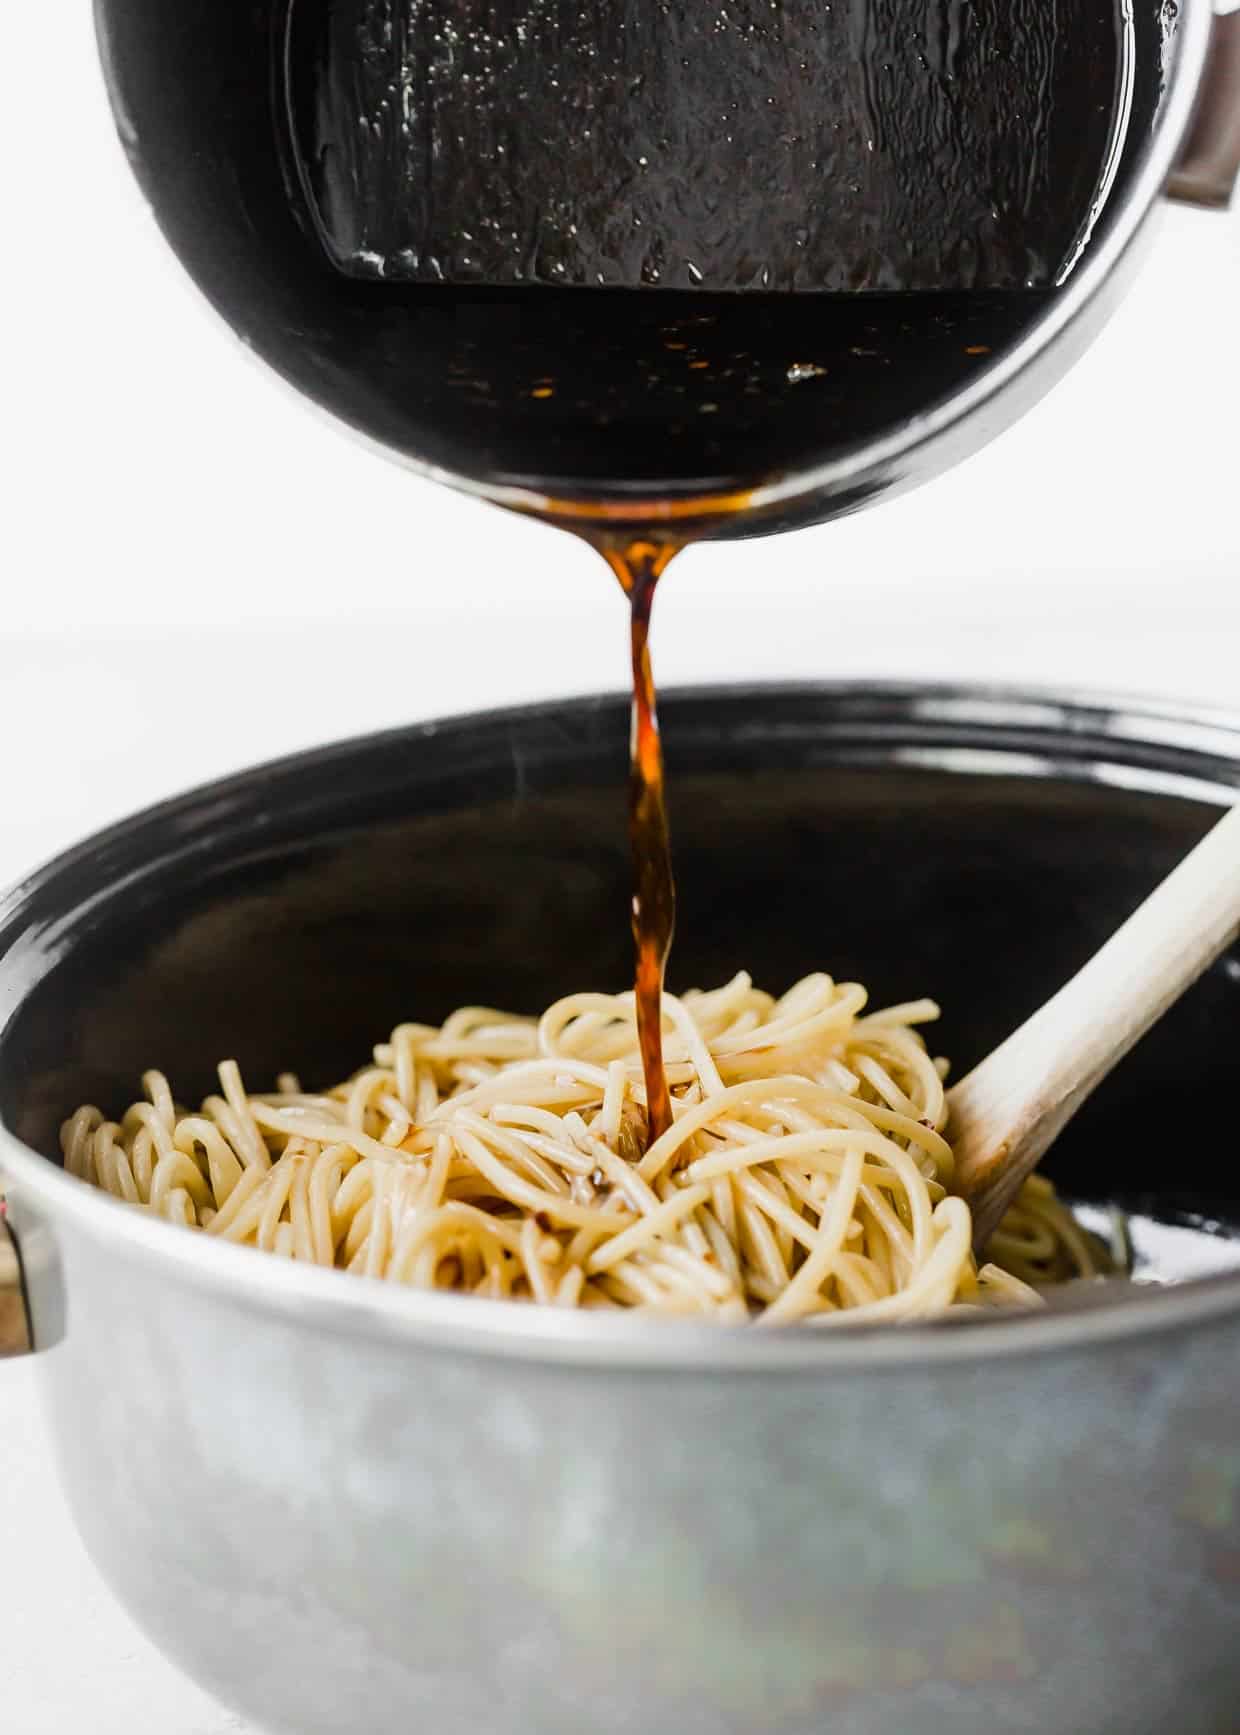 A sesame oil and soy sauce based sauce being poured overtop spaghetti noodles in a black pot.